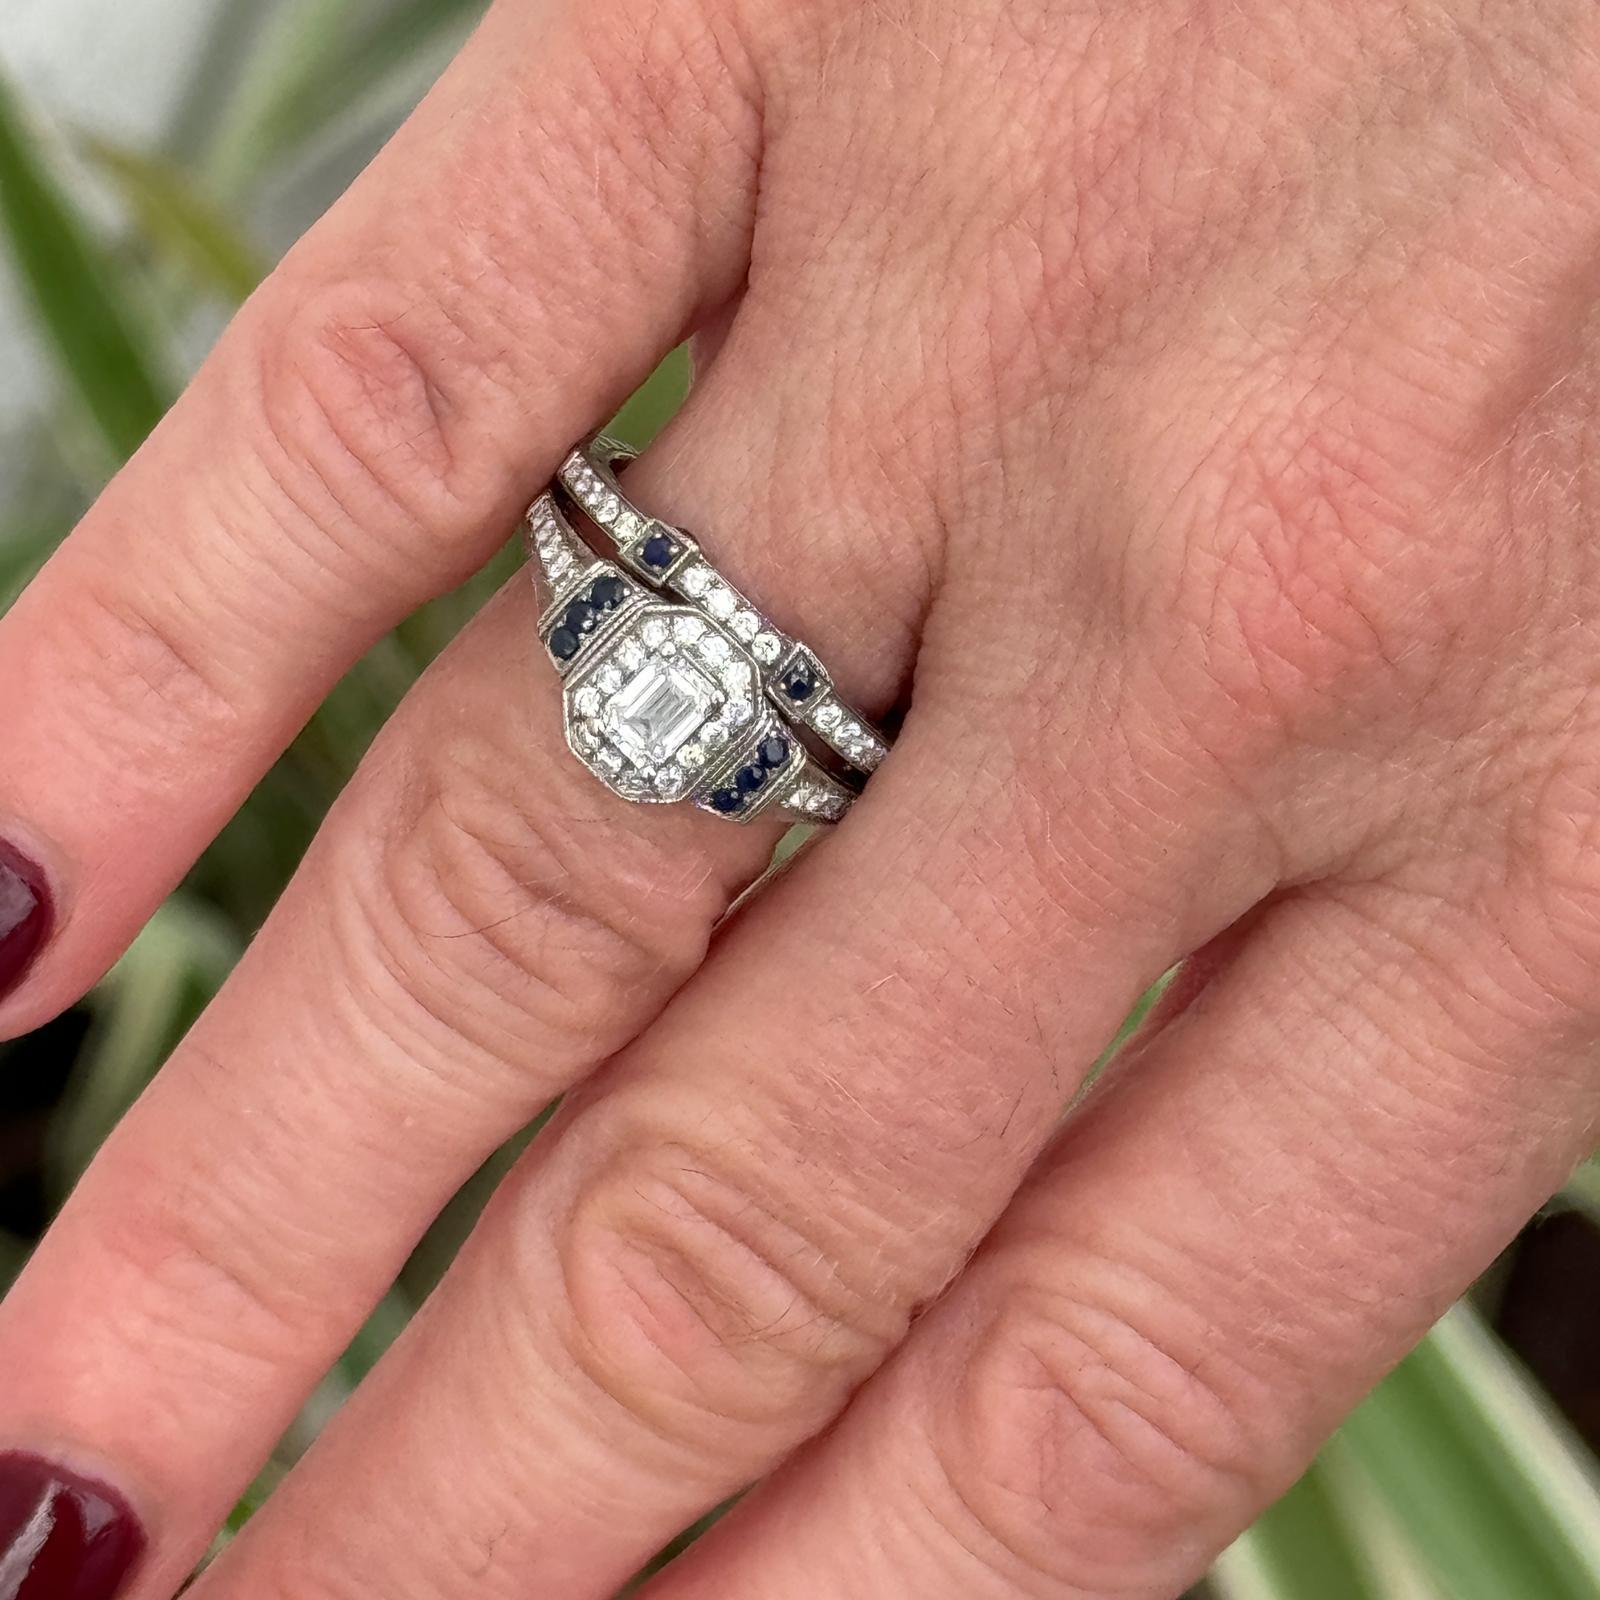 Emerald cut diamond engagement ring and bridal set crafted in 14 karat white gold. The engagement ring features an approximately .40 carat emerald cut diamond graded F color and SI1 clarity. The rings are set wtih 38 round brilliant cut diamonds